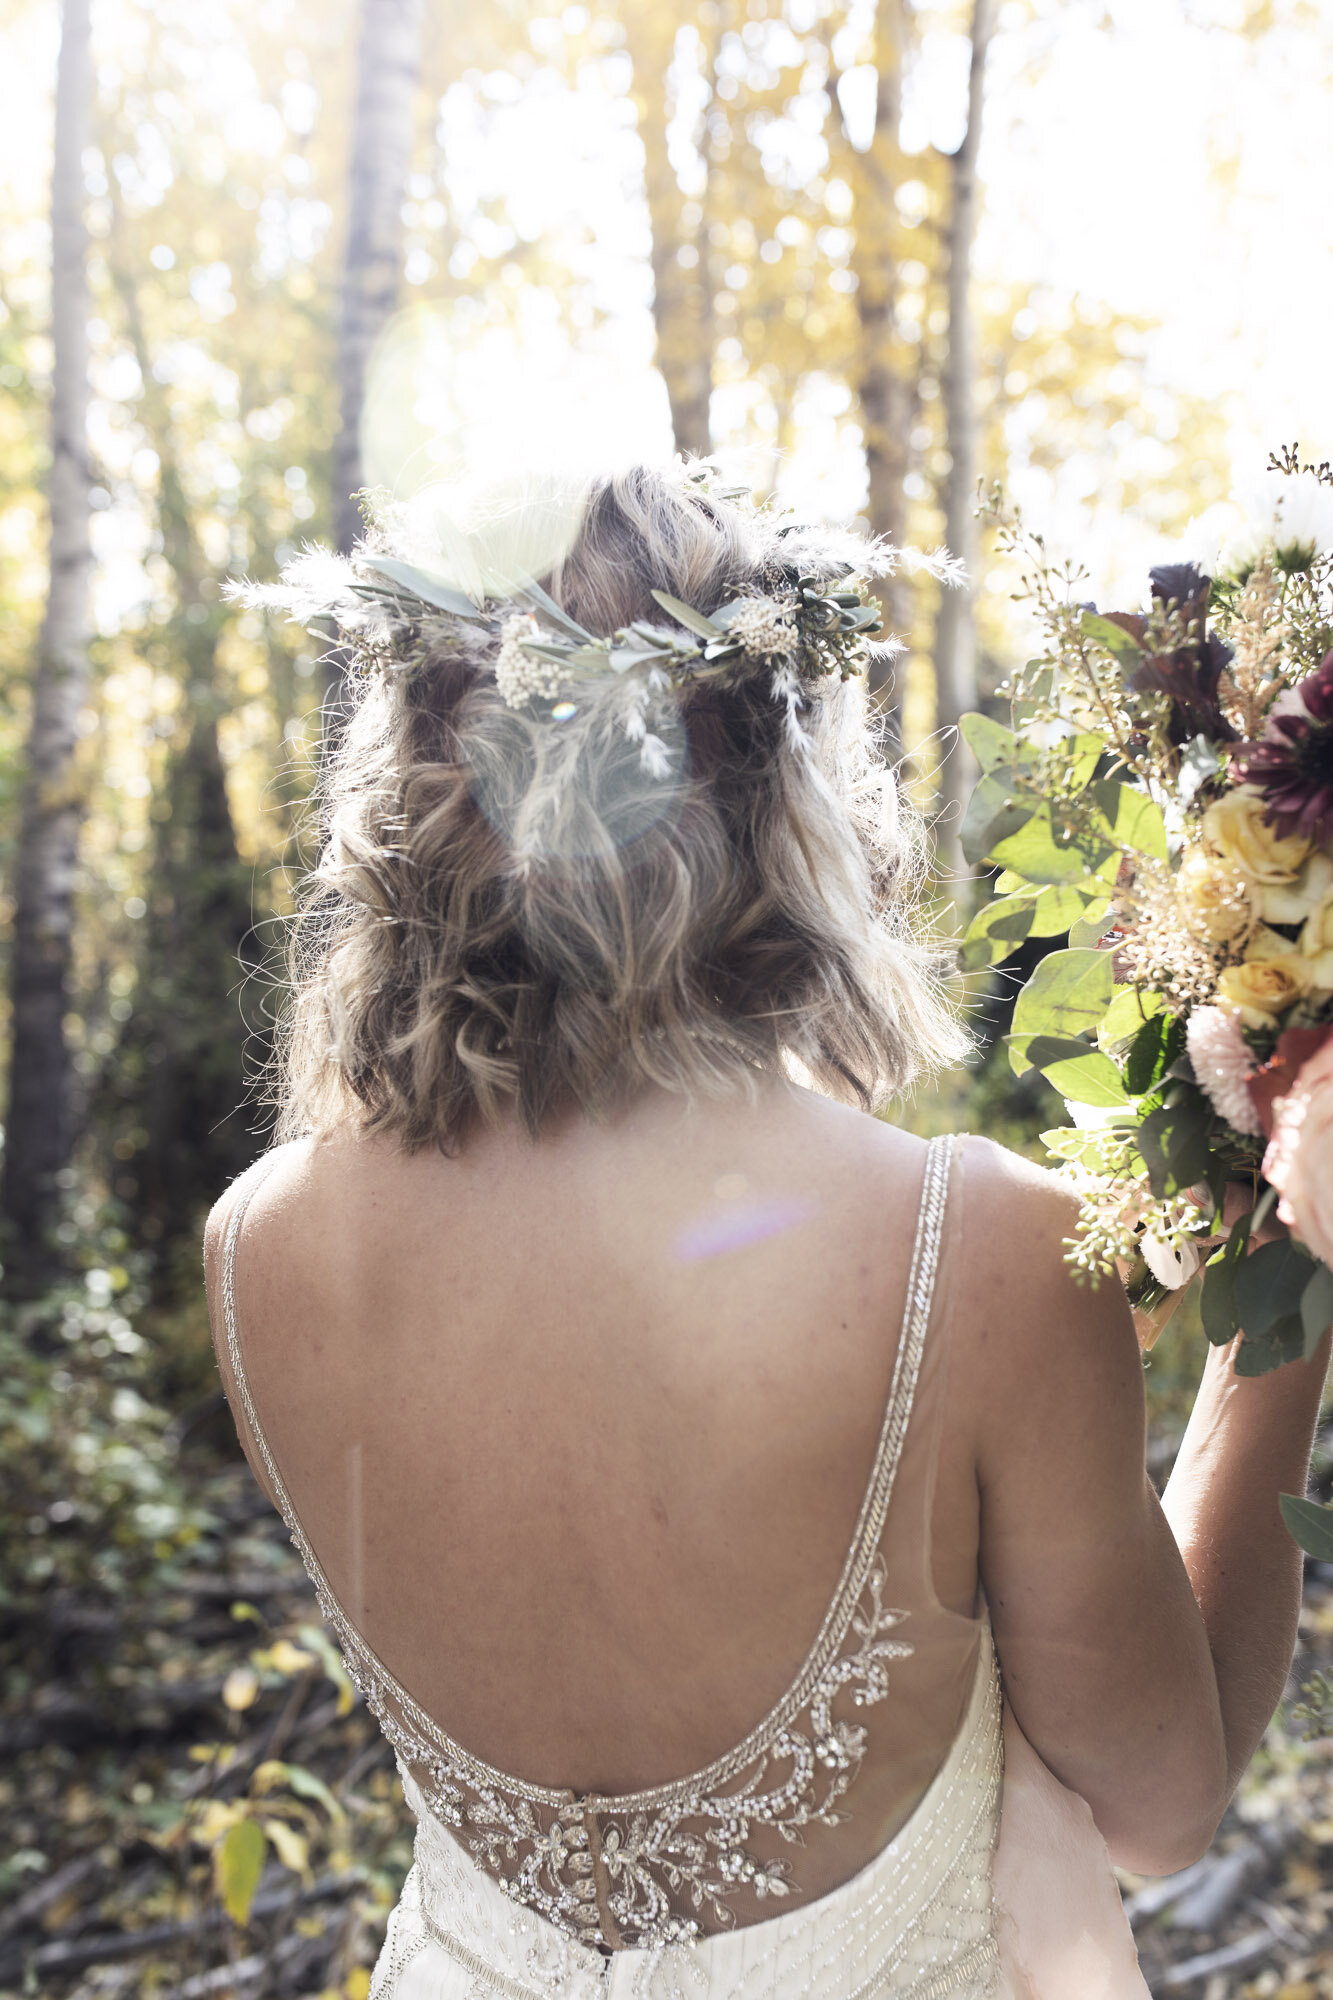 Jessica's Fall Mountain Bridal Session by Tessa Sheehan Photography